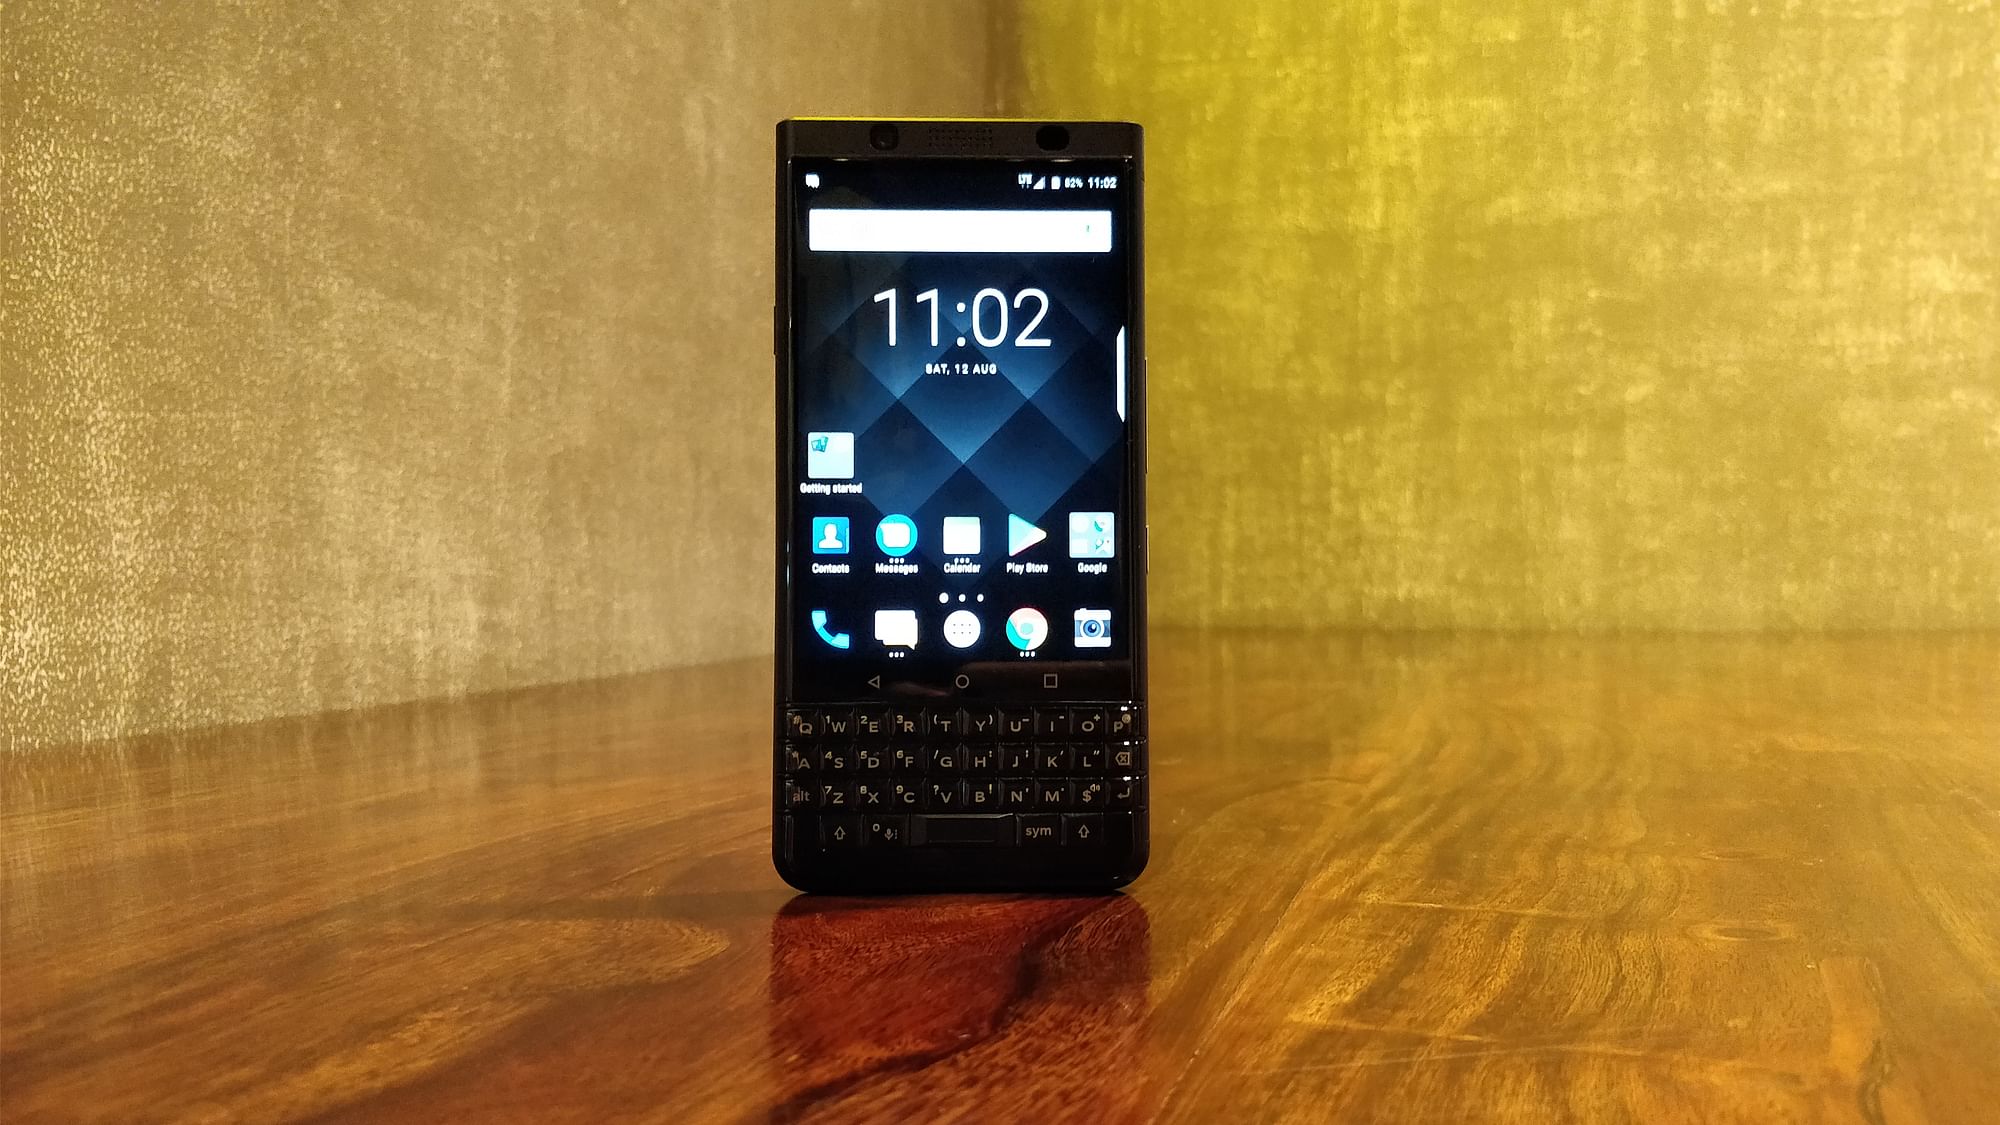 The BlackBerry KEYone  comes with android Nougat 7.1.1